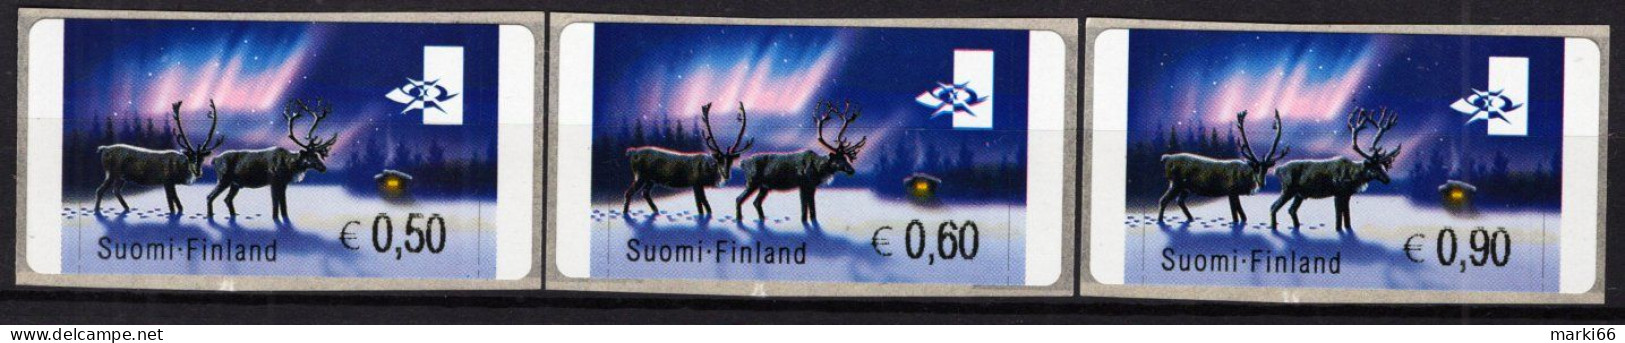 Finland - 2002 - Christmas - Northern Lights And Reindeers - Mint ATM Self-adhesive Stamp Set (EUR) - Timbres De Distributeurs [ATM]